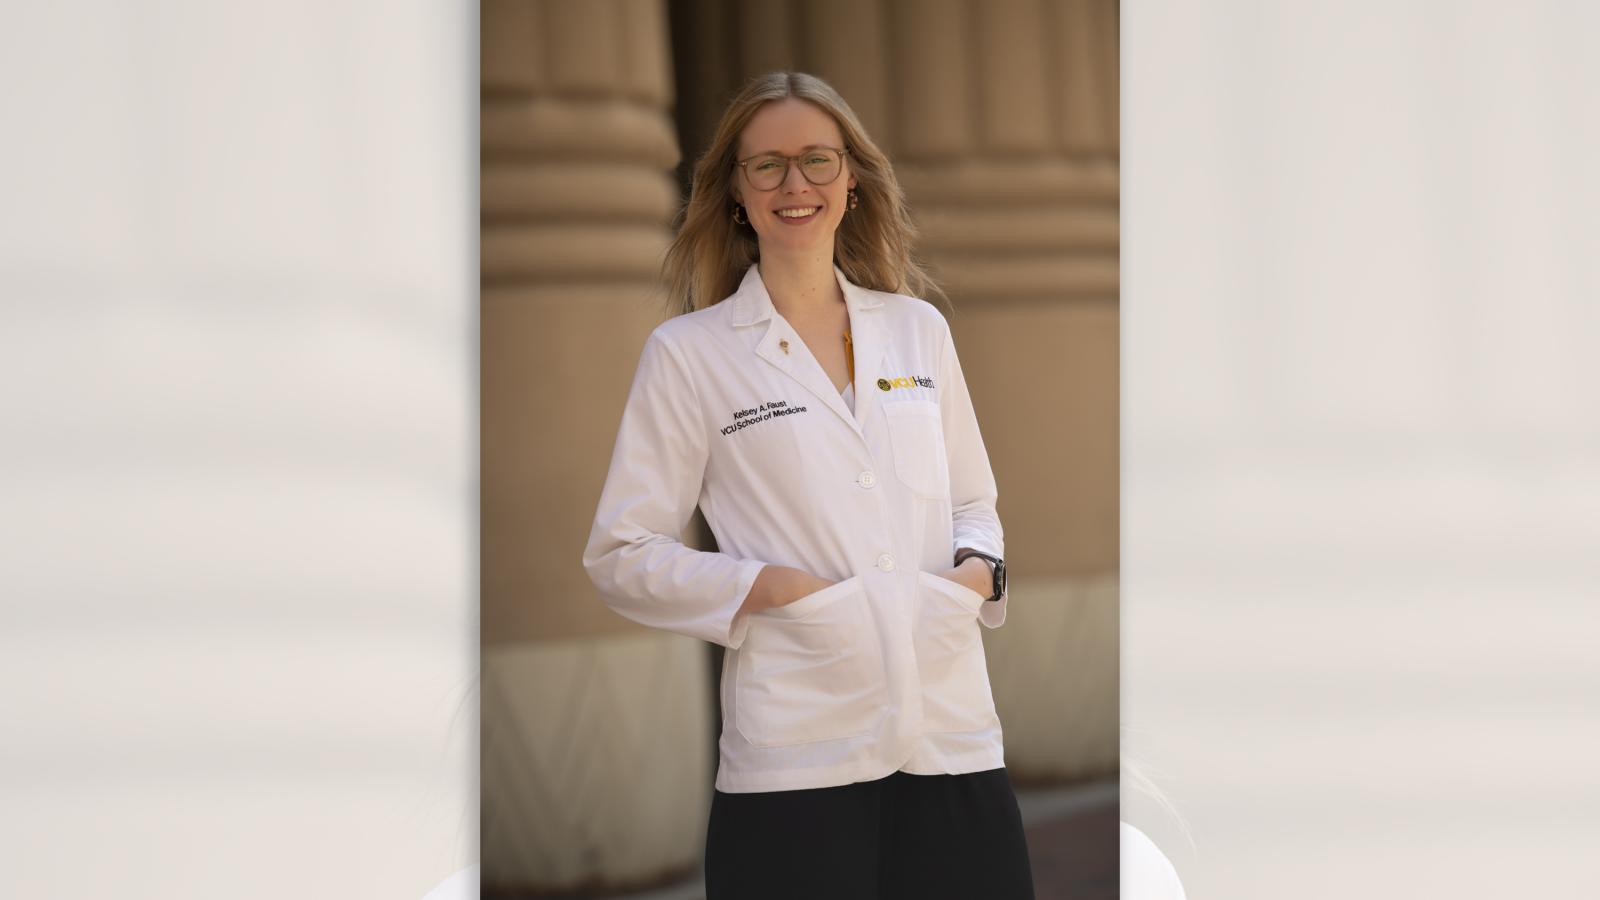 Kelsey Faust is the first in her family to attend college and now she is on the path to becoming a neurosurgeon. Photo: Tom Kojscich, VCU University Relations